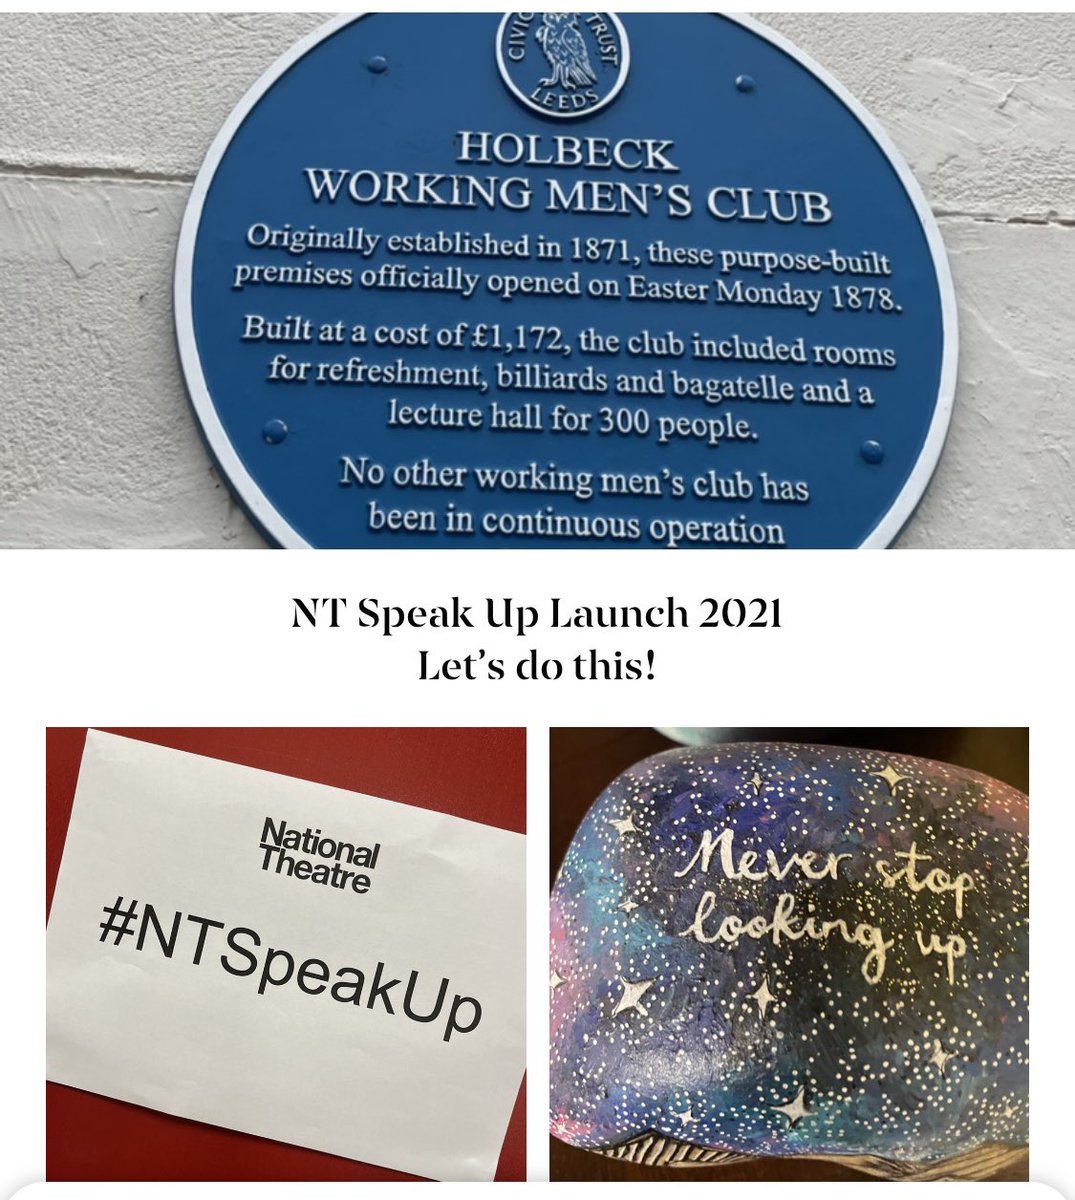 Home after an amazing two days with @NT_Schools for the launch of #NTSpeakup with the fantastic @choltheatre Feeling totally inspired by all the amazing creative arts teachers and partner theatres in this project. So proud and grateful that the students and I get to be part of it